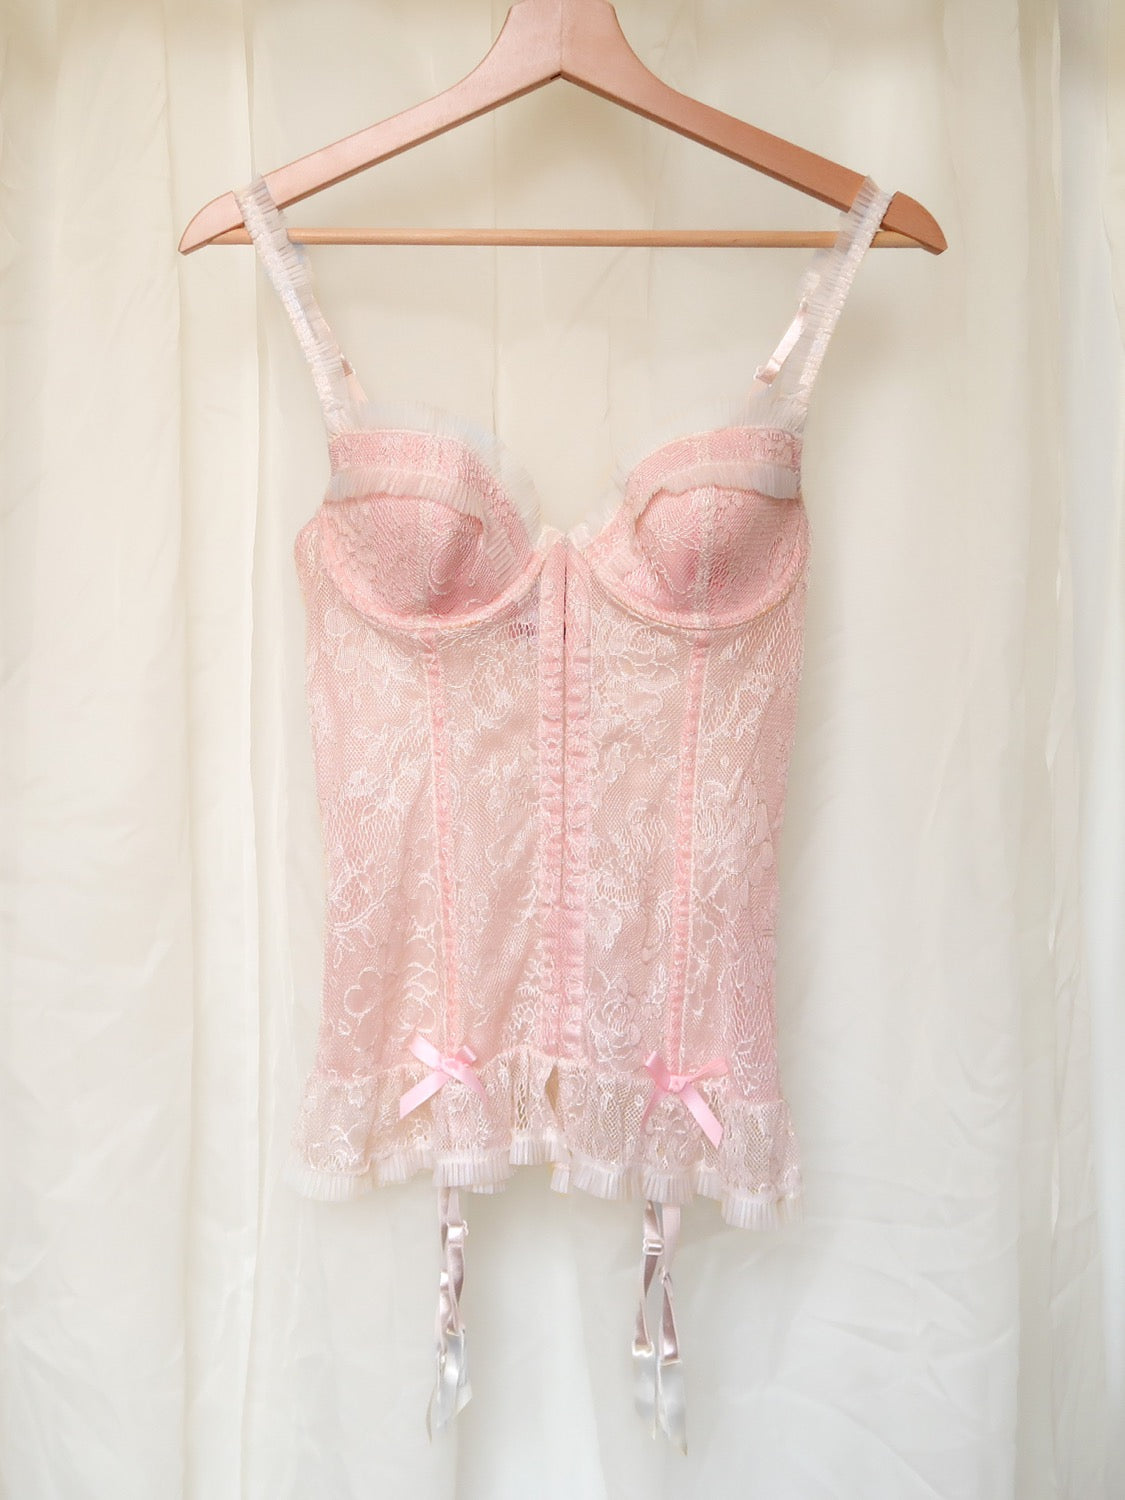 VS '00s BABYDOLL BUSTIER RUFFLED LACE TOP IN PINK - (34C/36B/32D + 36C